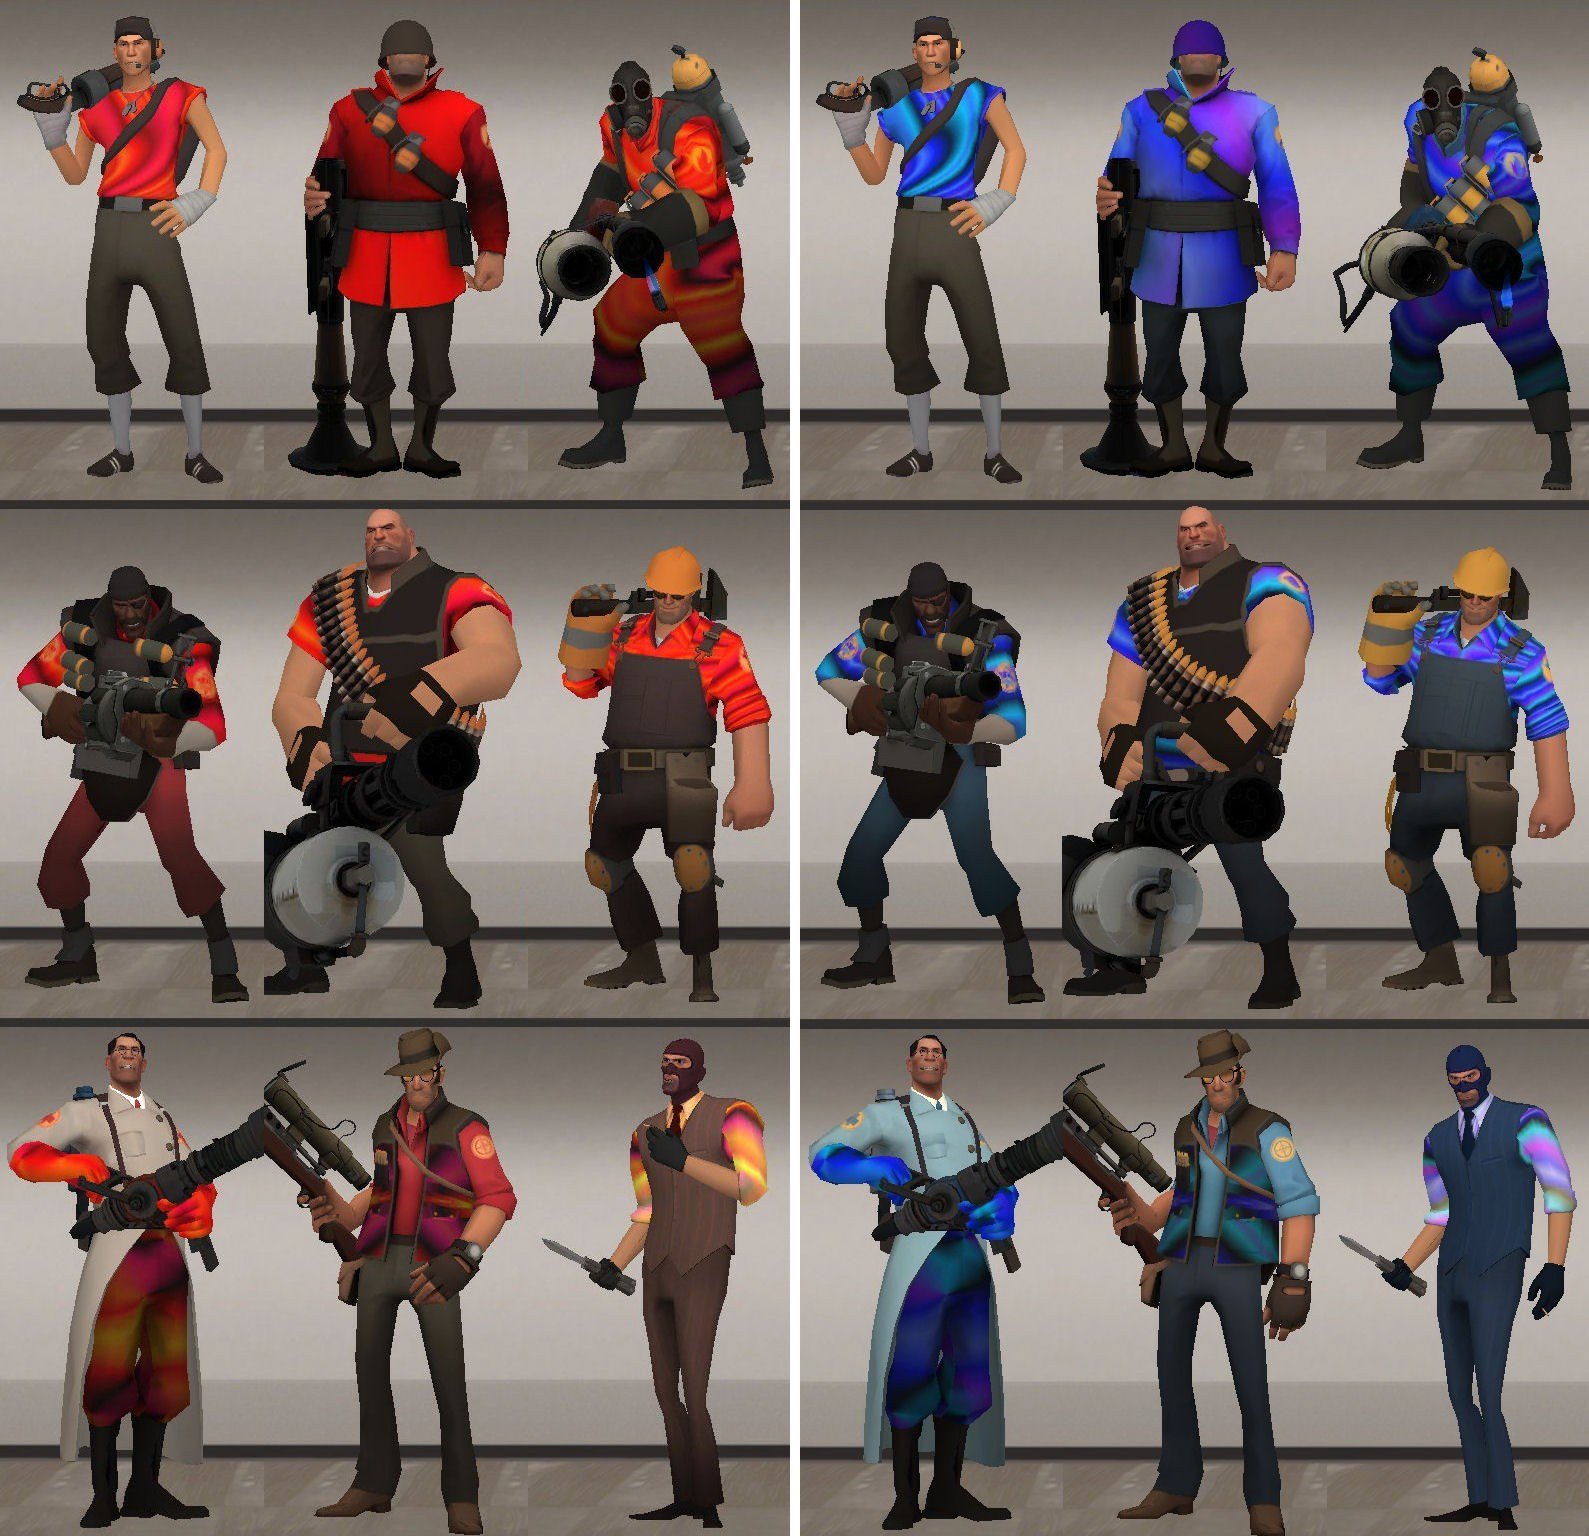 I also have a female pyro and spy skin that I haven't uploaded. 